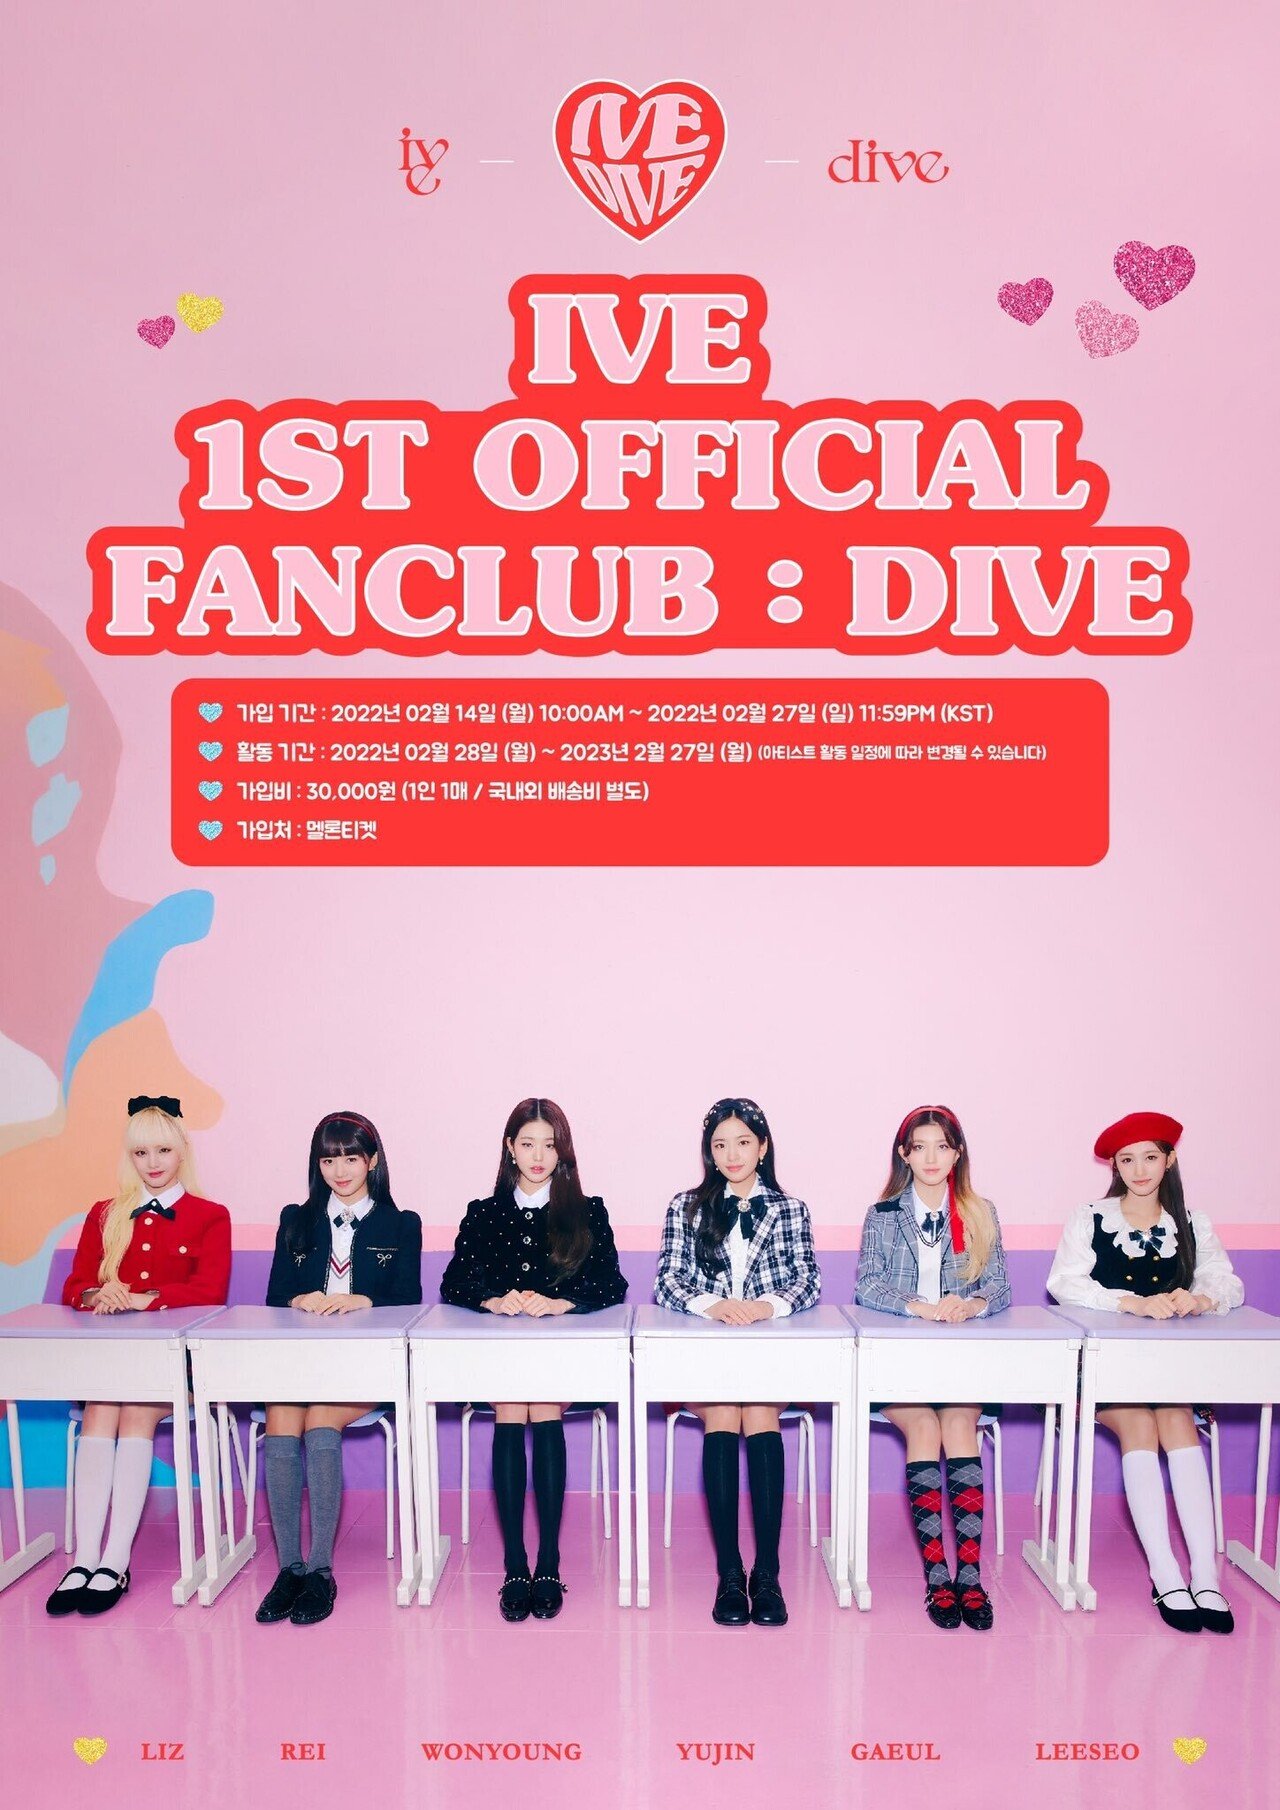 IVE????♥️ 公式ファンクラブ｢1st OFFICIAL FANCLUB : DIVE｣ 2.14 10:00～ 会員募集！????✨????｜Water  white lily*｜note